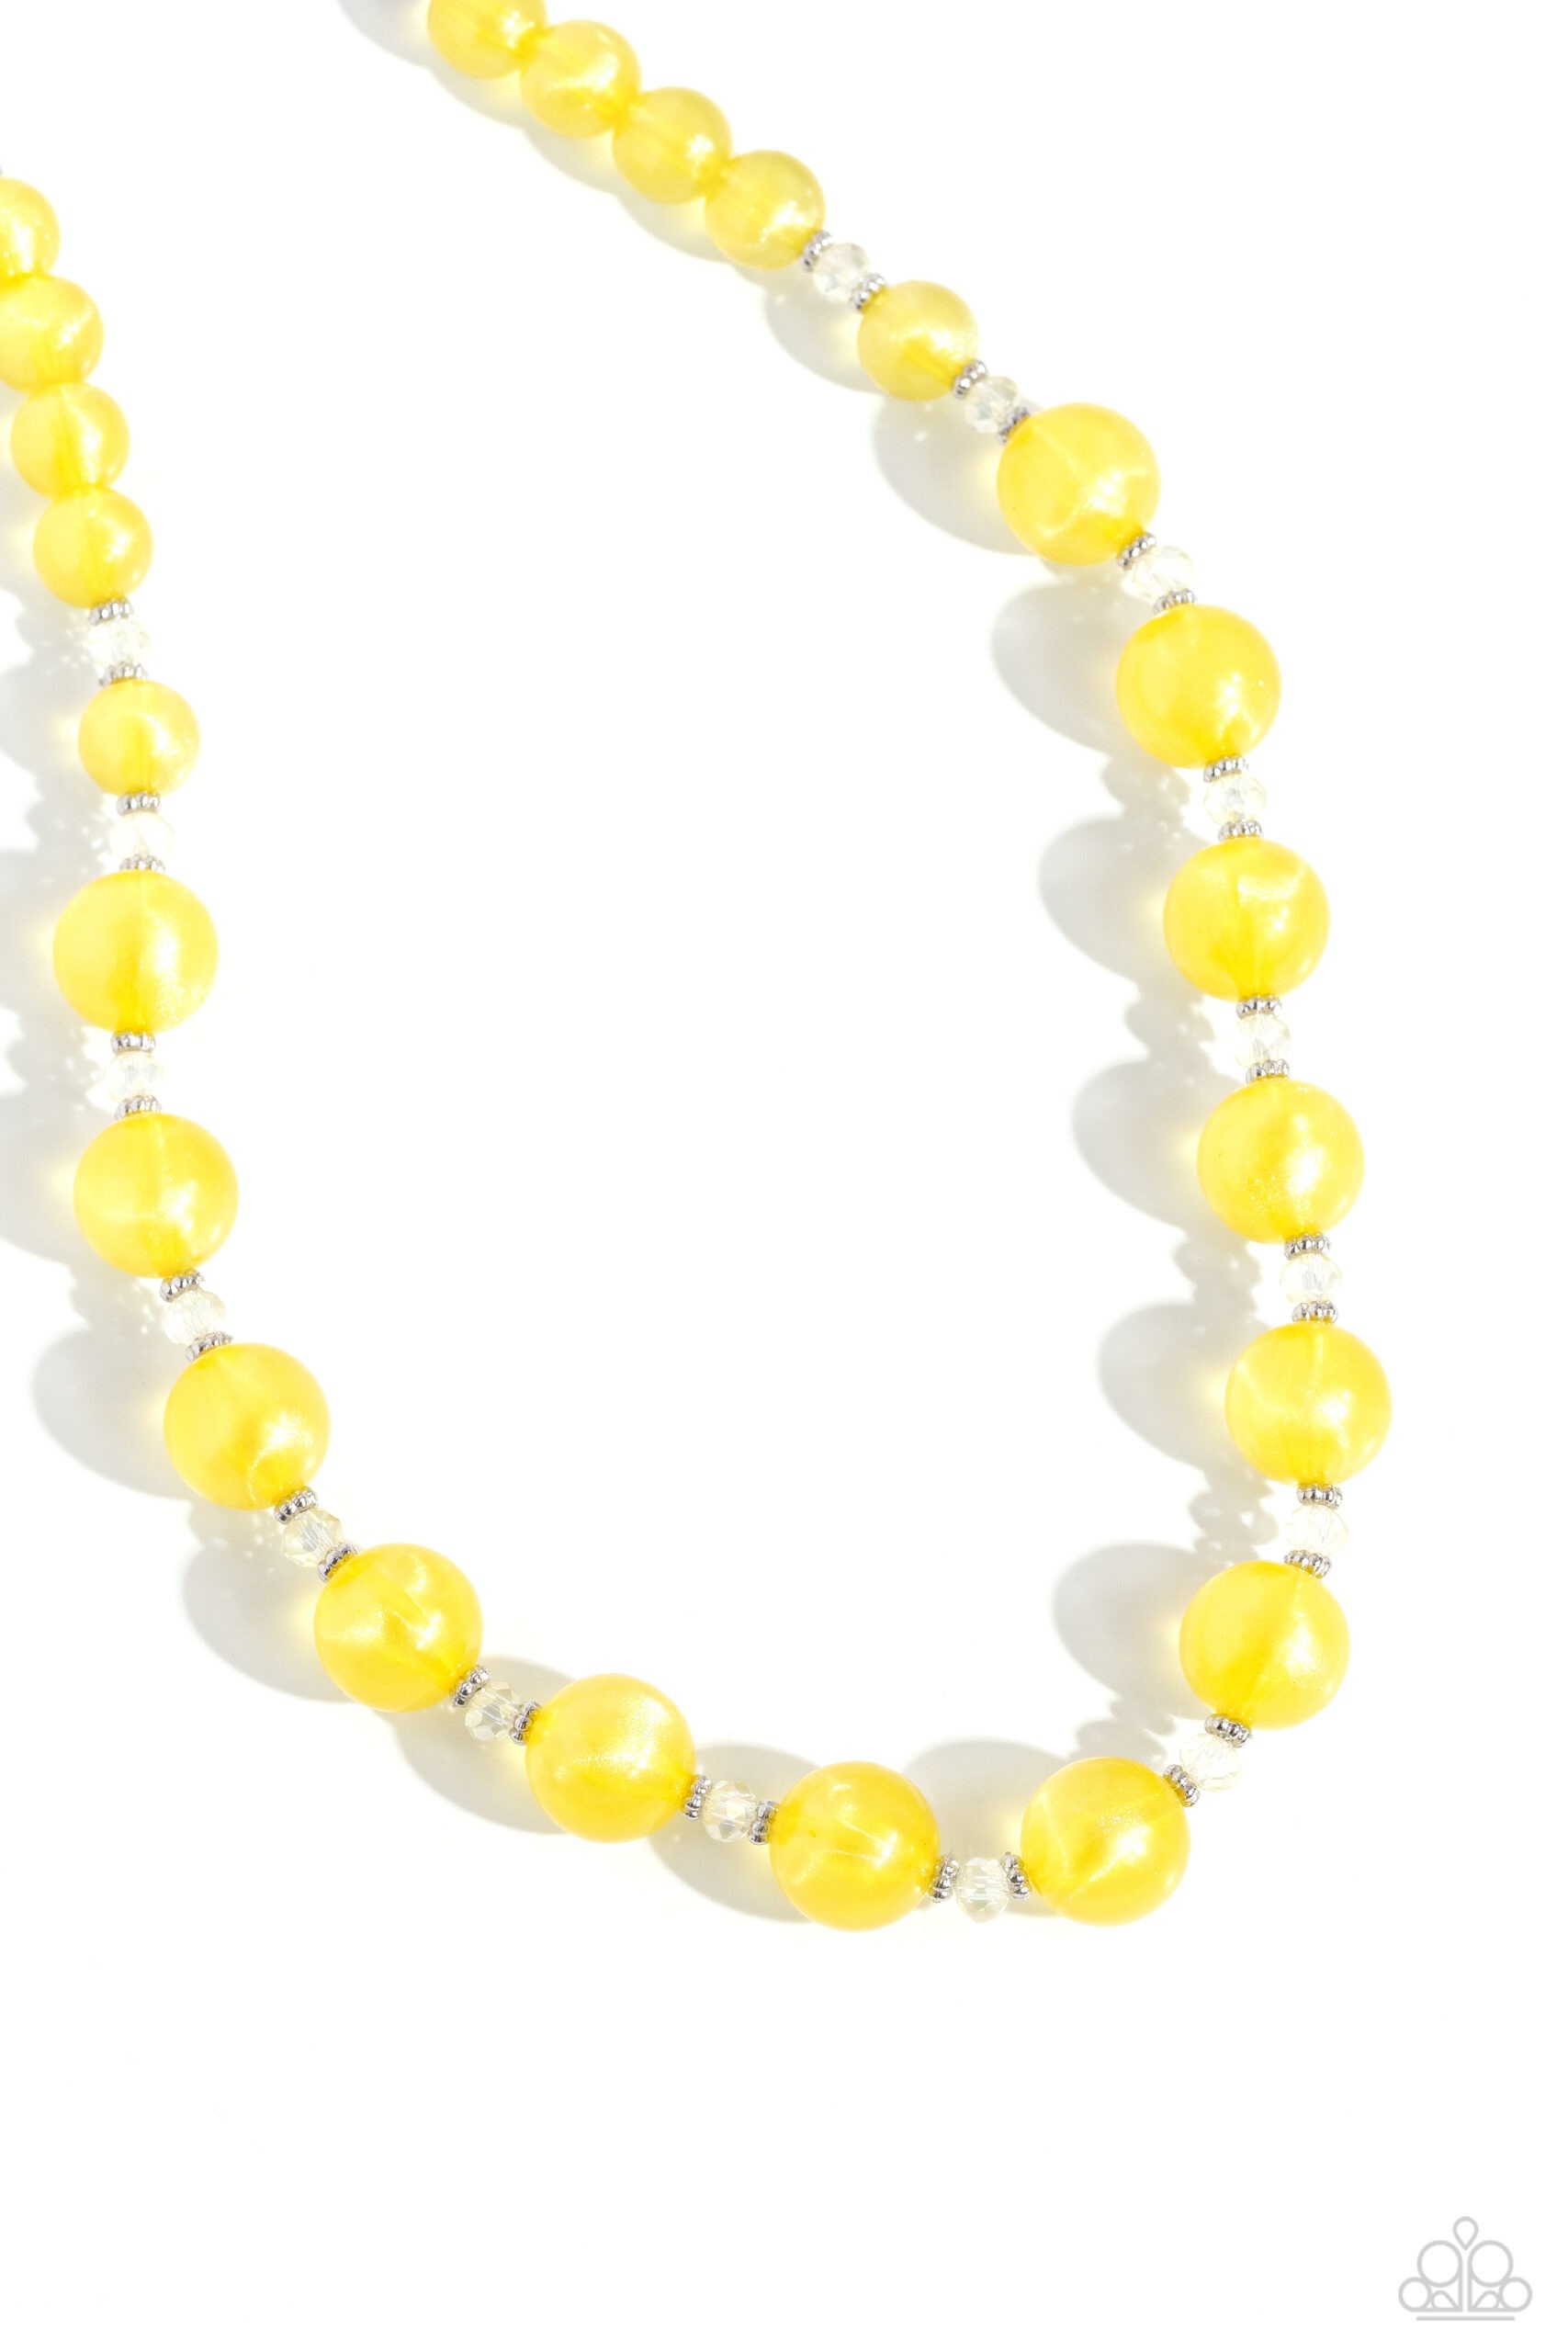 Necklace - Timelessly Tantalizing - Yellow